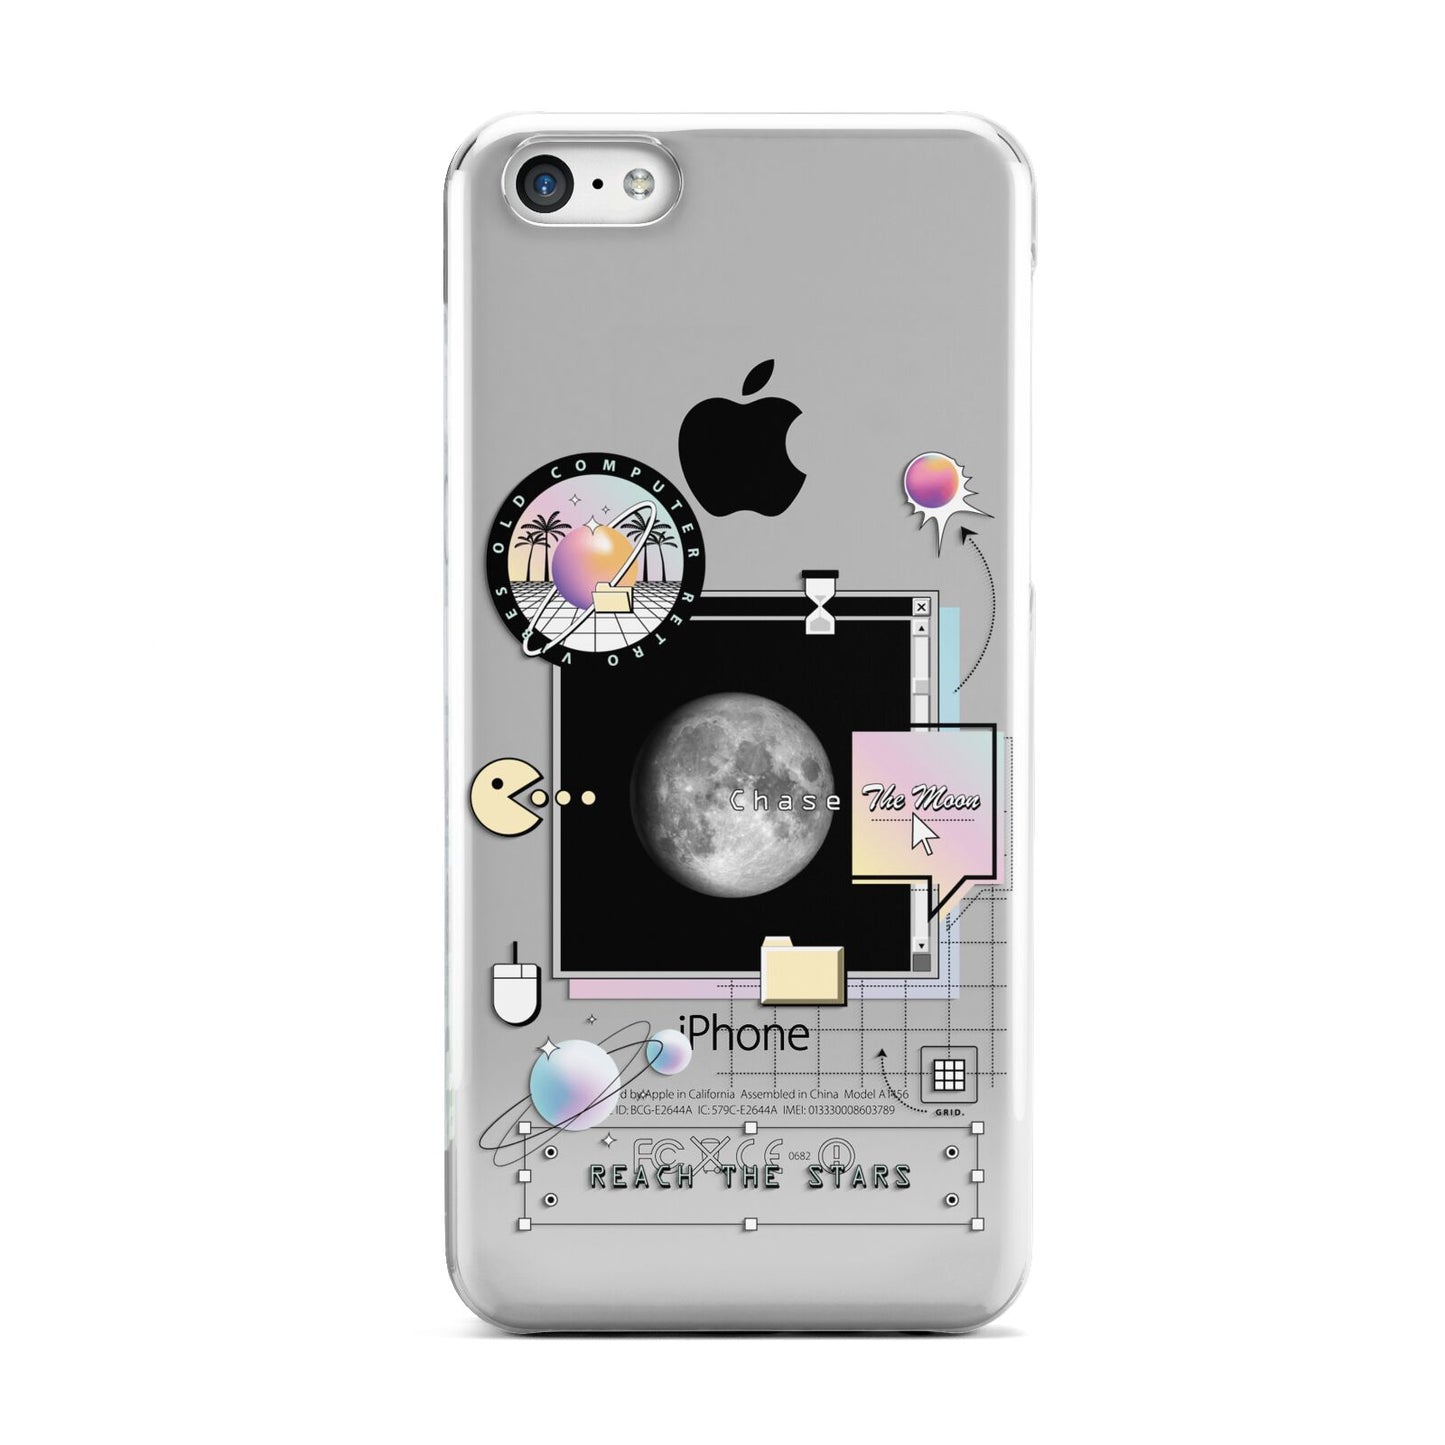 Chase The Moon Apple iPhone 5c Case